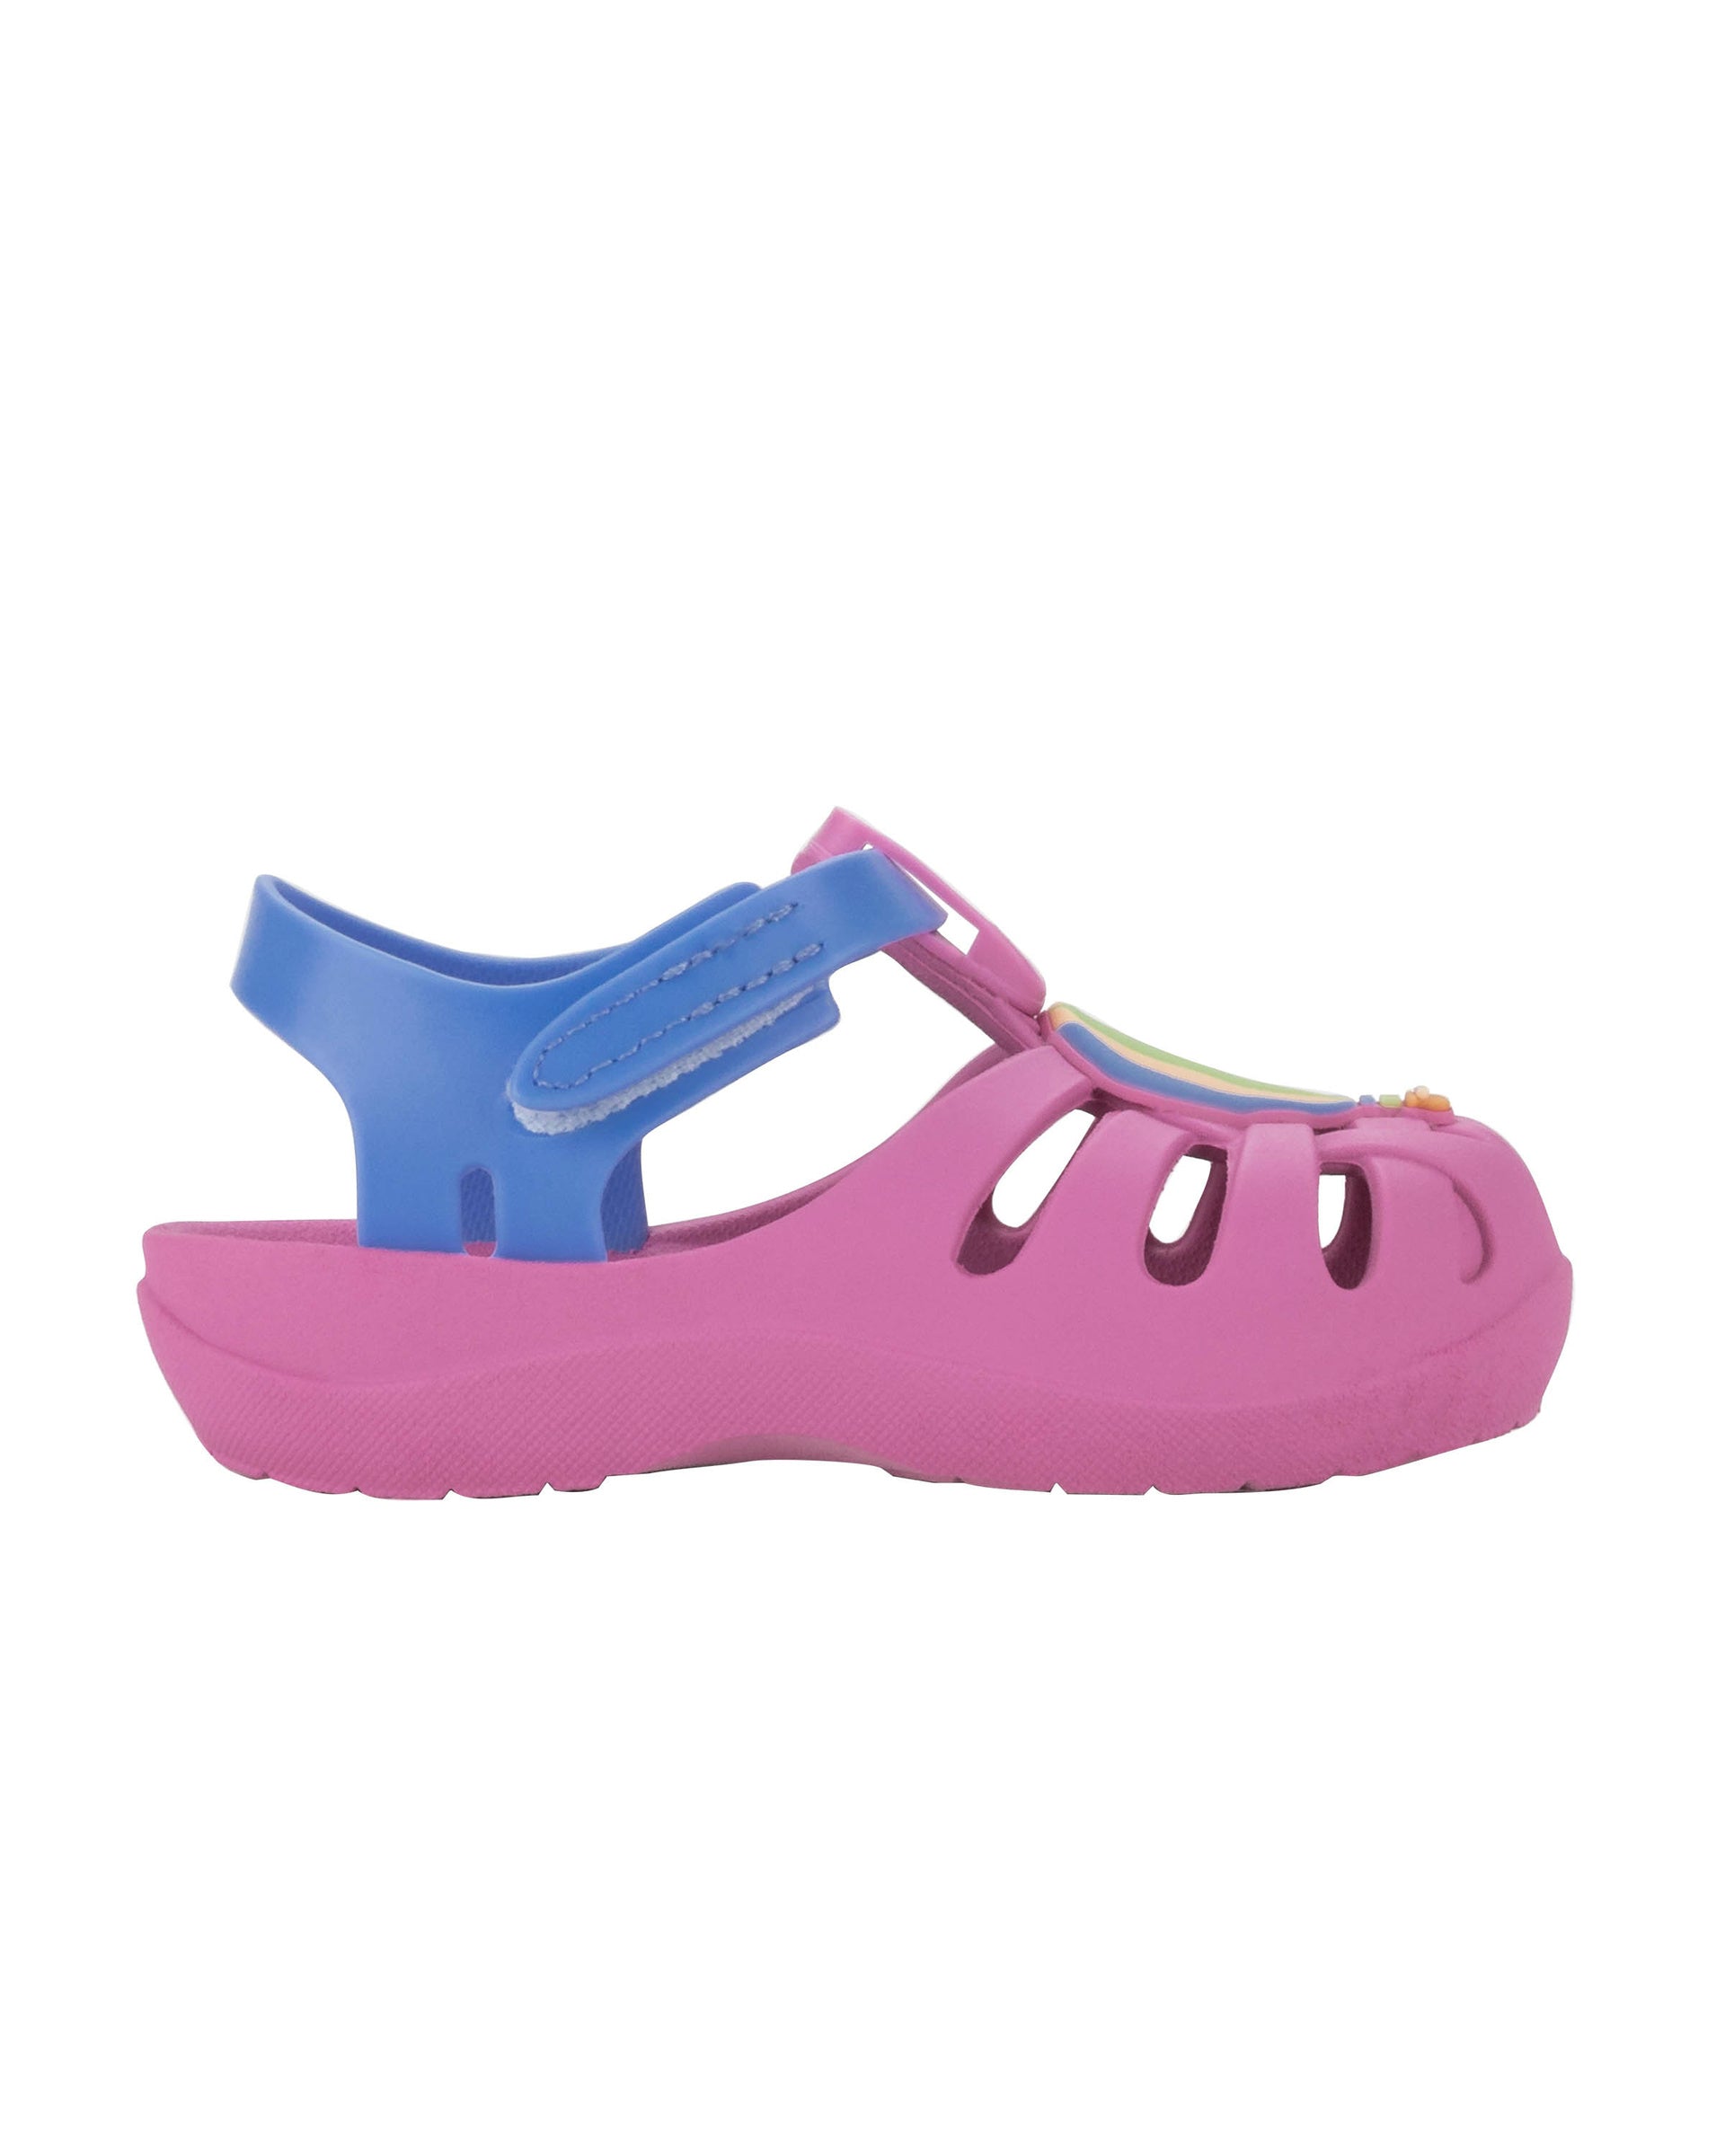 Outer side view of a purple Ipanema Summer baby sandal with hot air balloon on the upper.